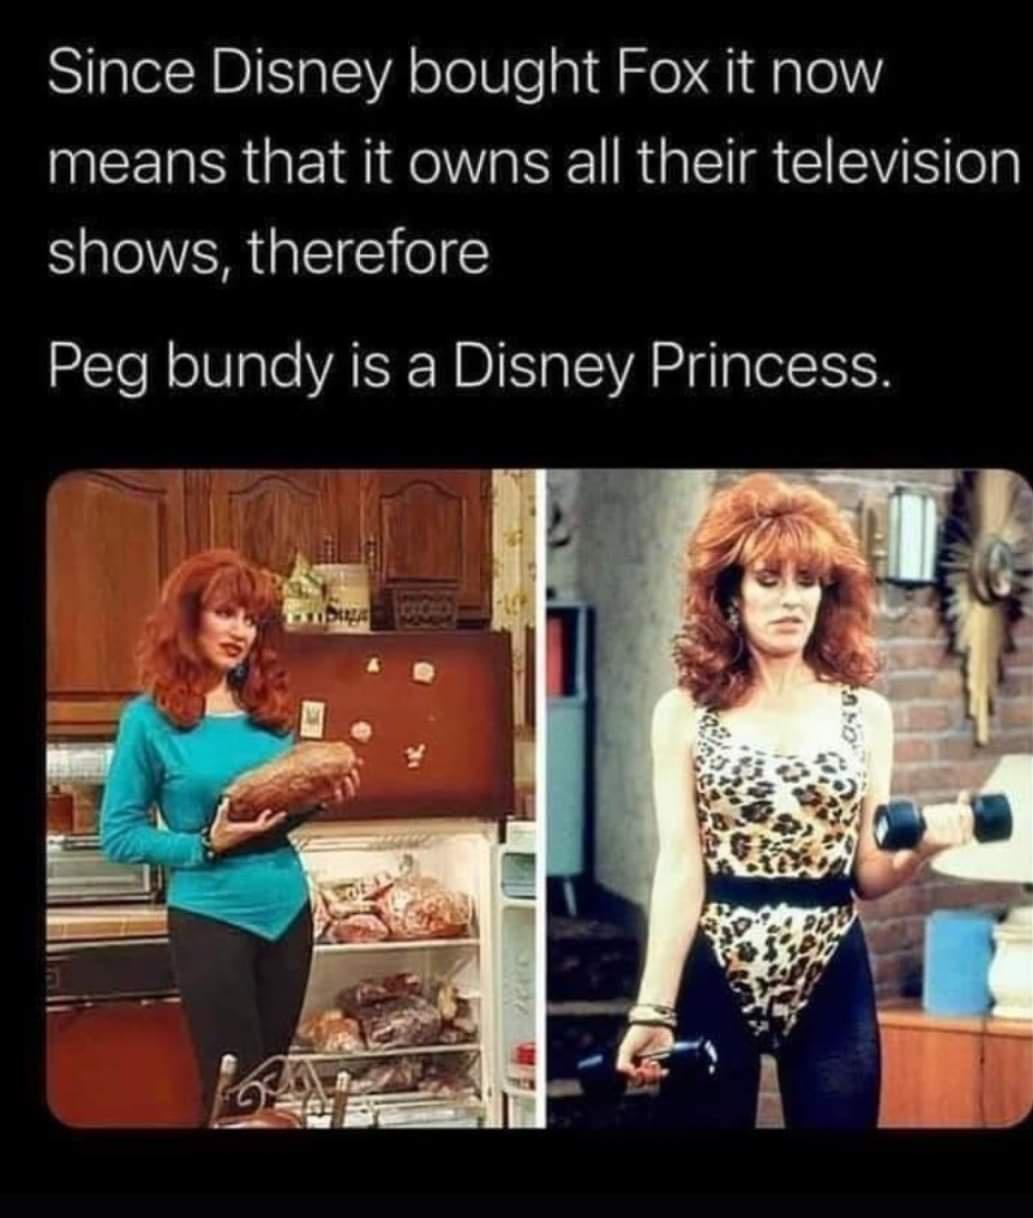 funny pictures - Since Disney bought Fox it now means that it owns all their television shows, therefore Peg bundy is a Disney Princess.